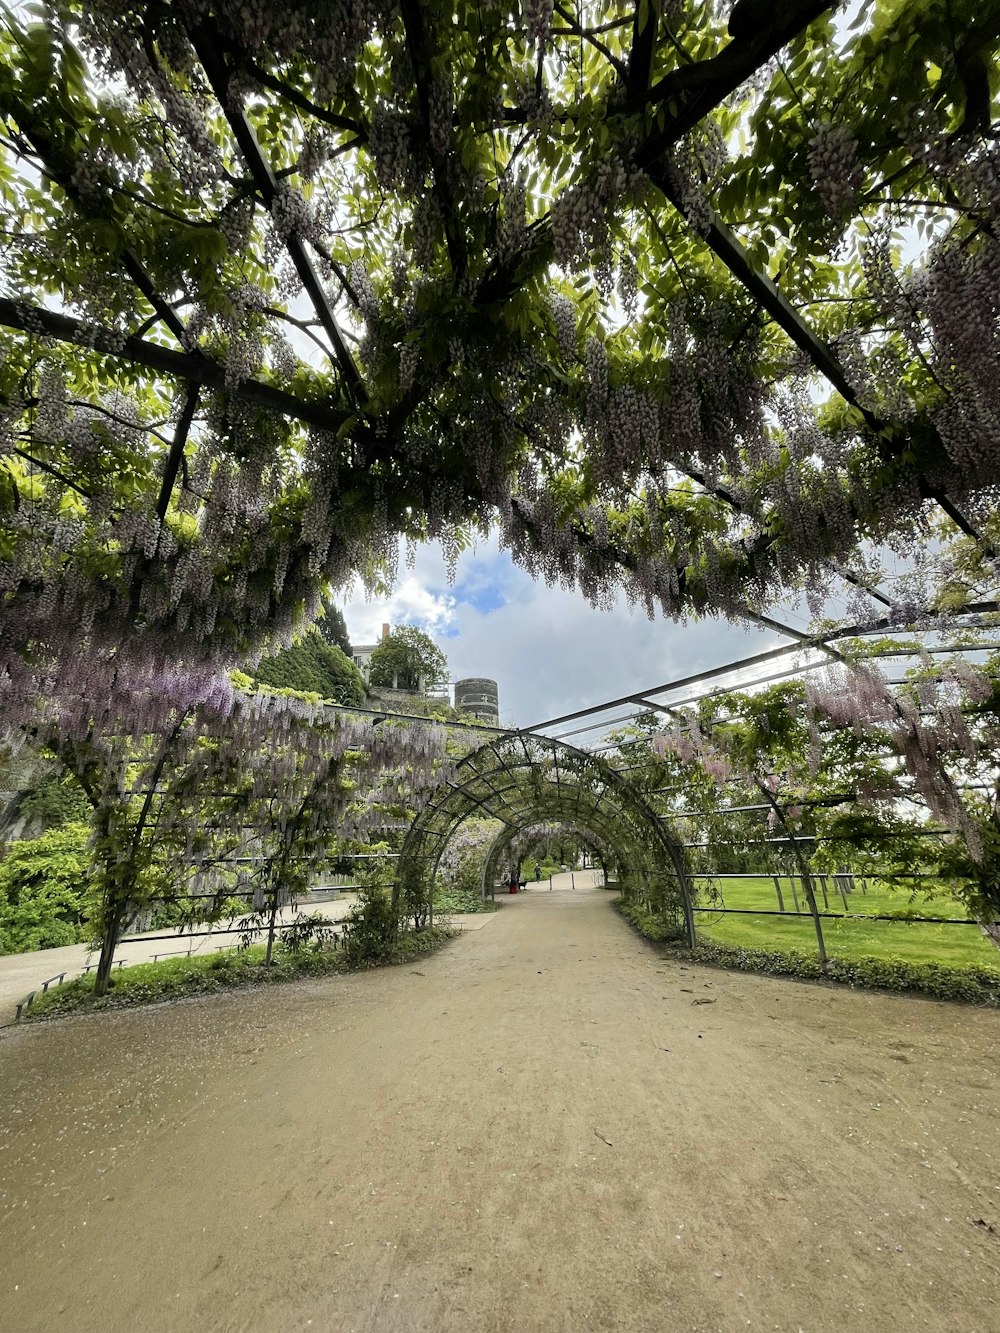 a walkway in a park covered in purple flowers